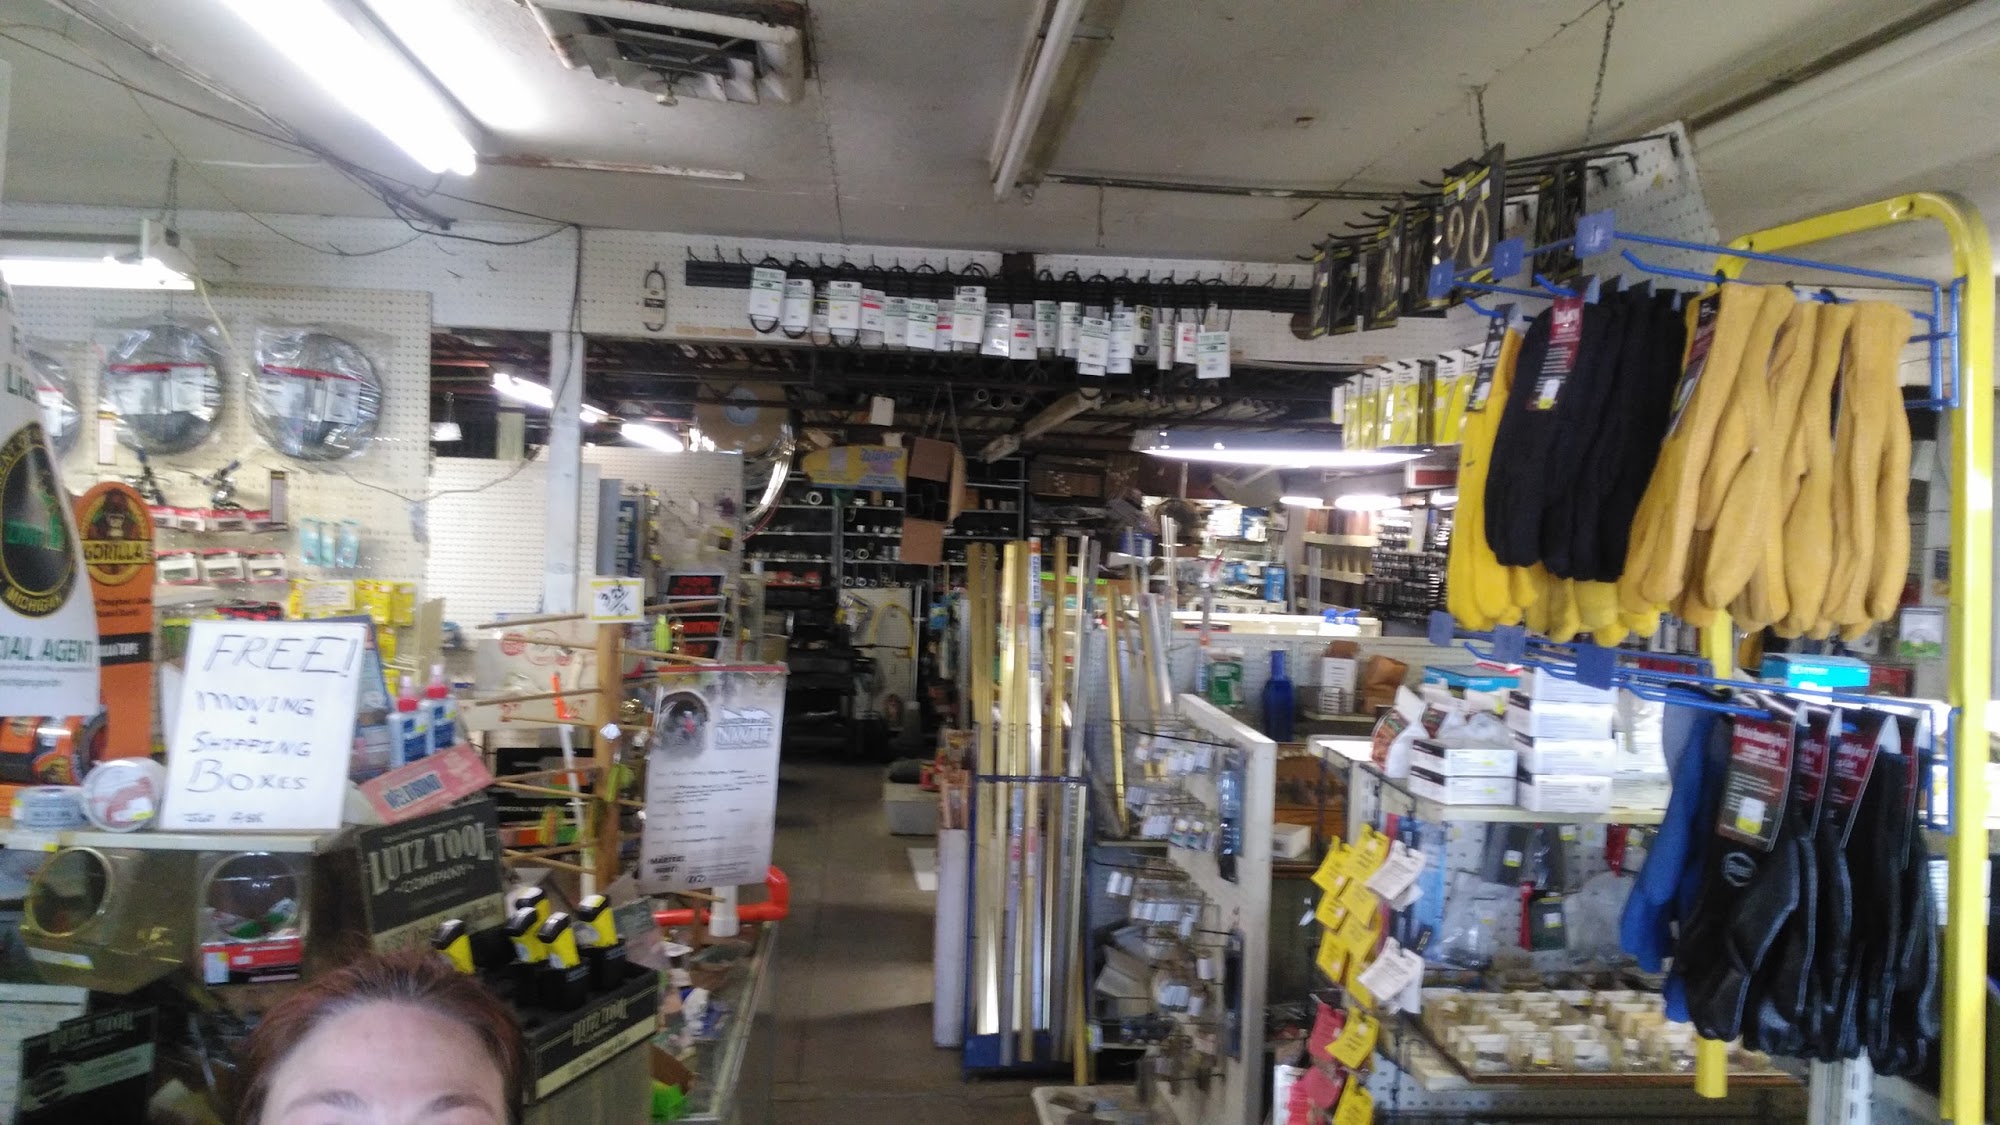 Johnny's Hardware and Well Pump Service